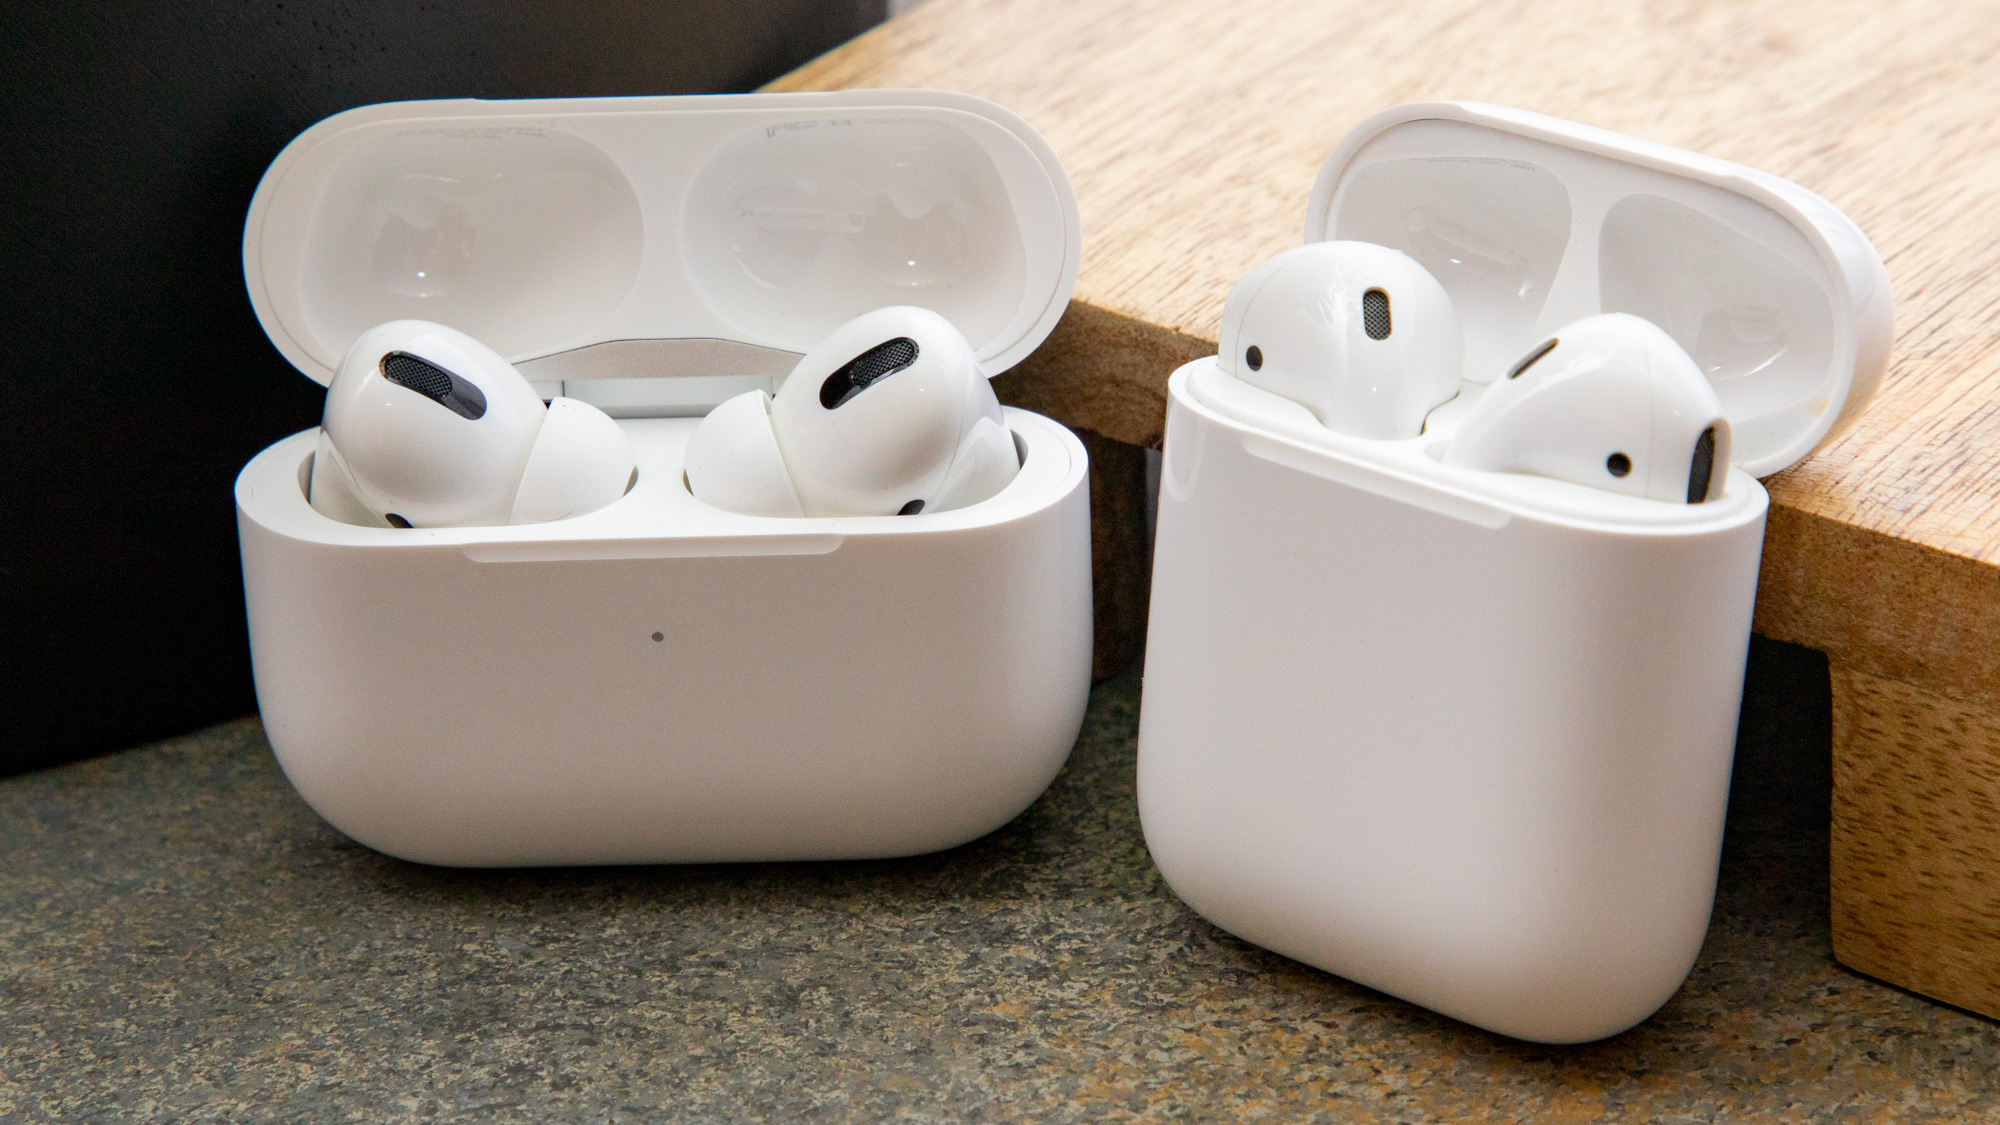 Apple AirPods Pro in the charging case, next to Apple AirPods in the charging case.